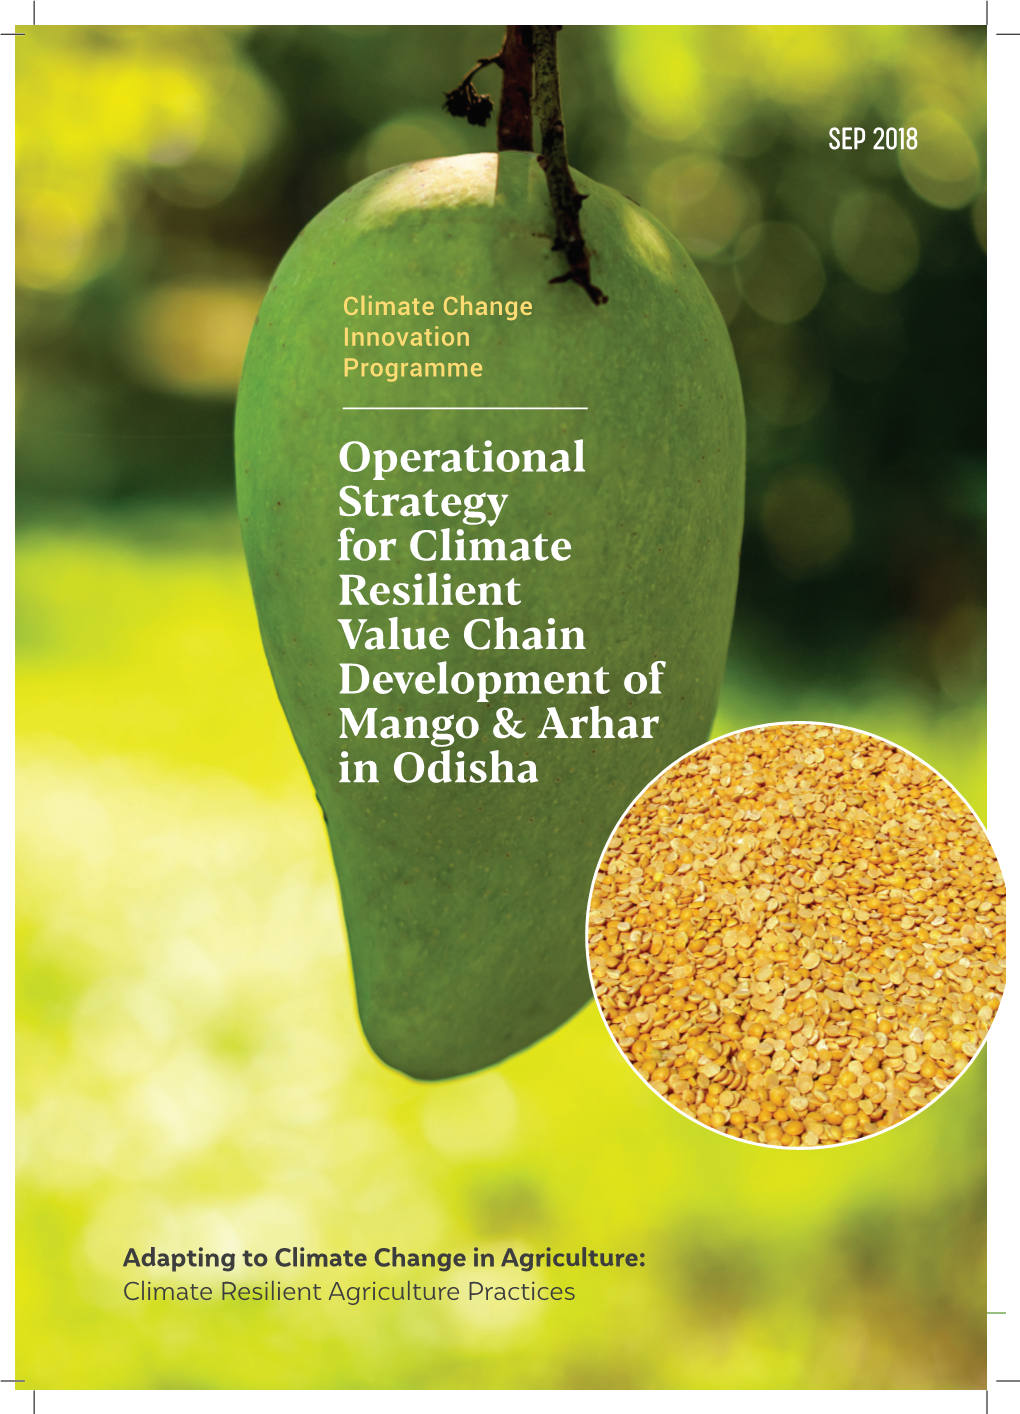 Operational Strategy for Climate Resilient Value Chain Development of Mango & Arhar in Odisha